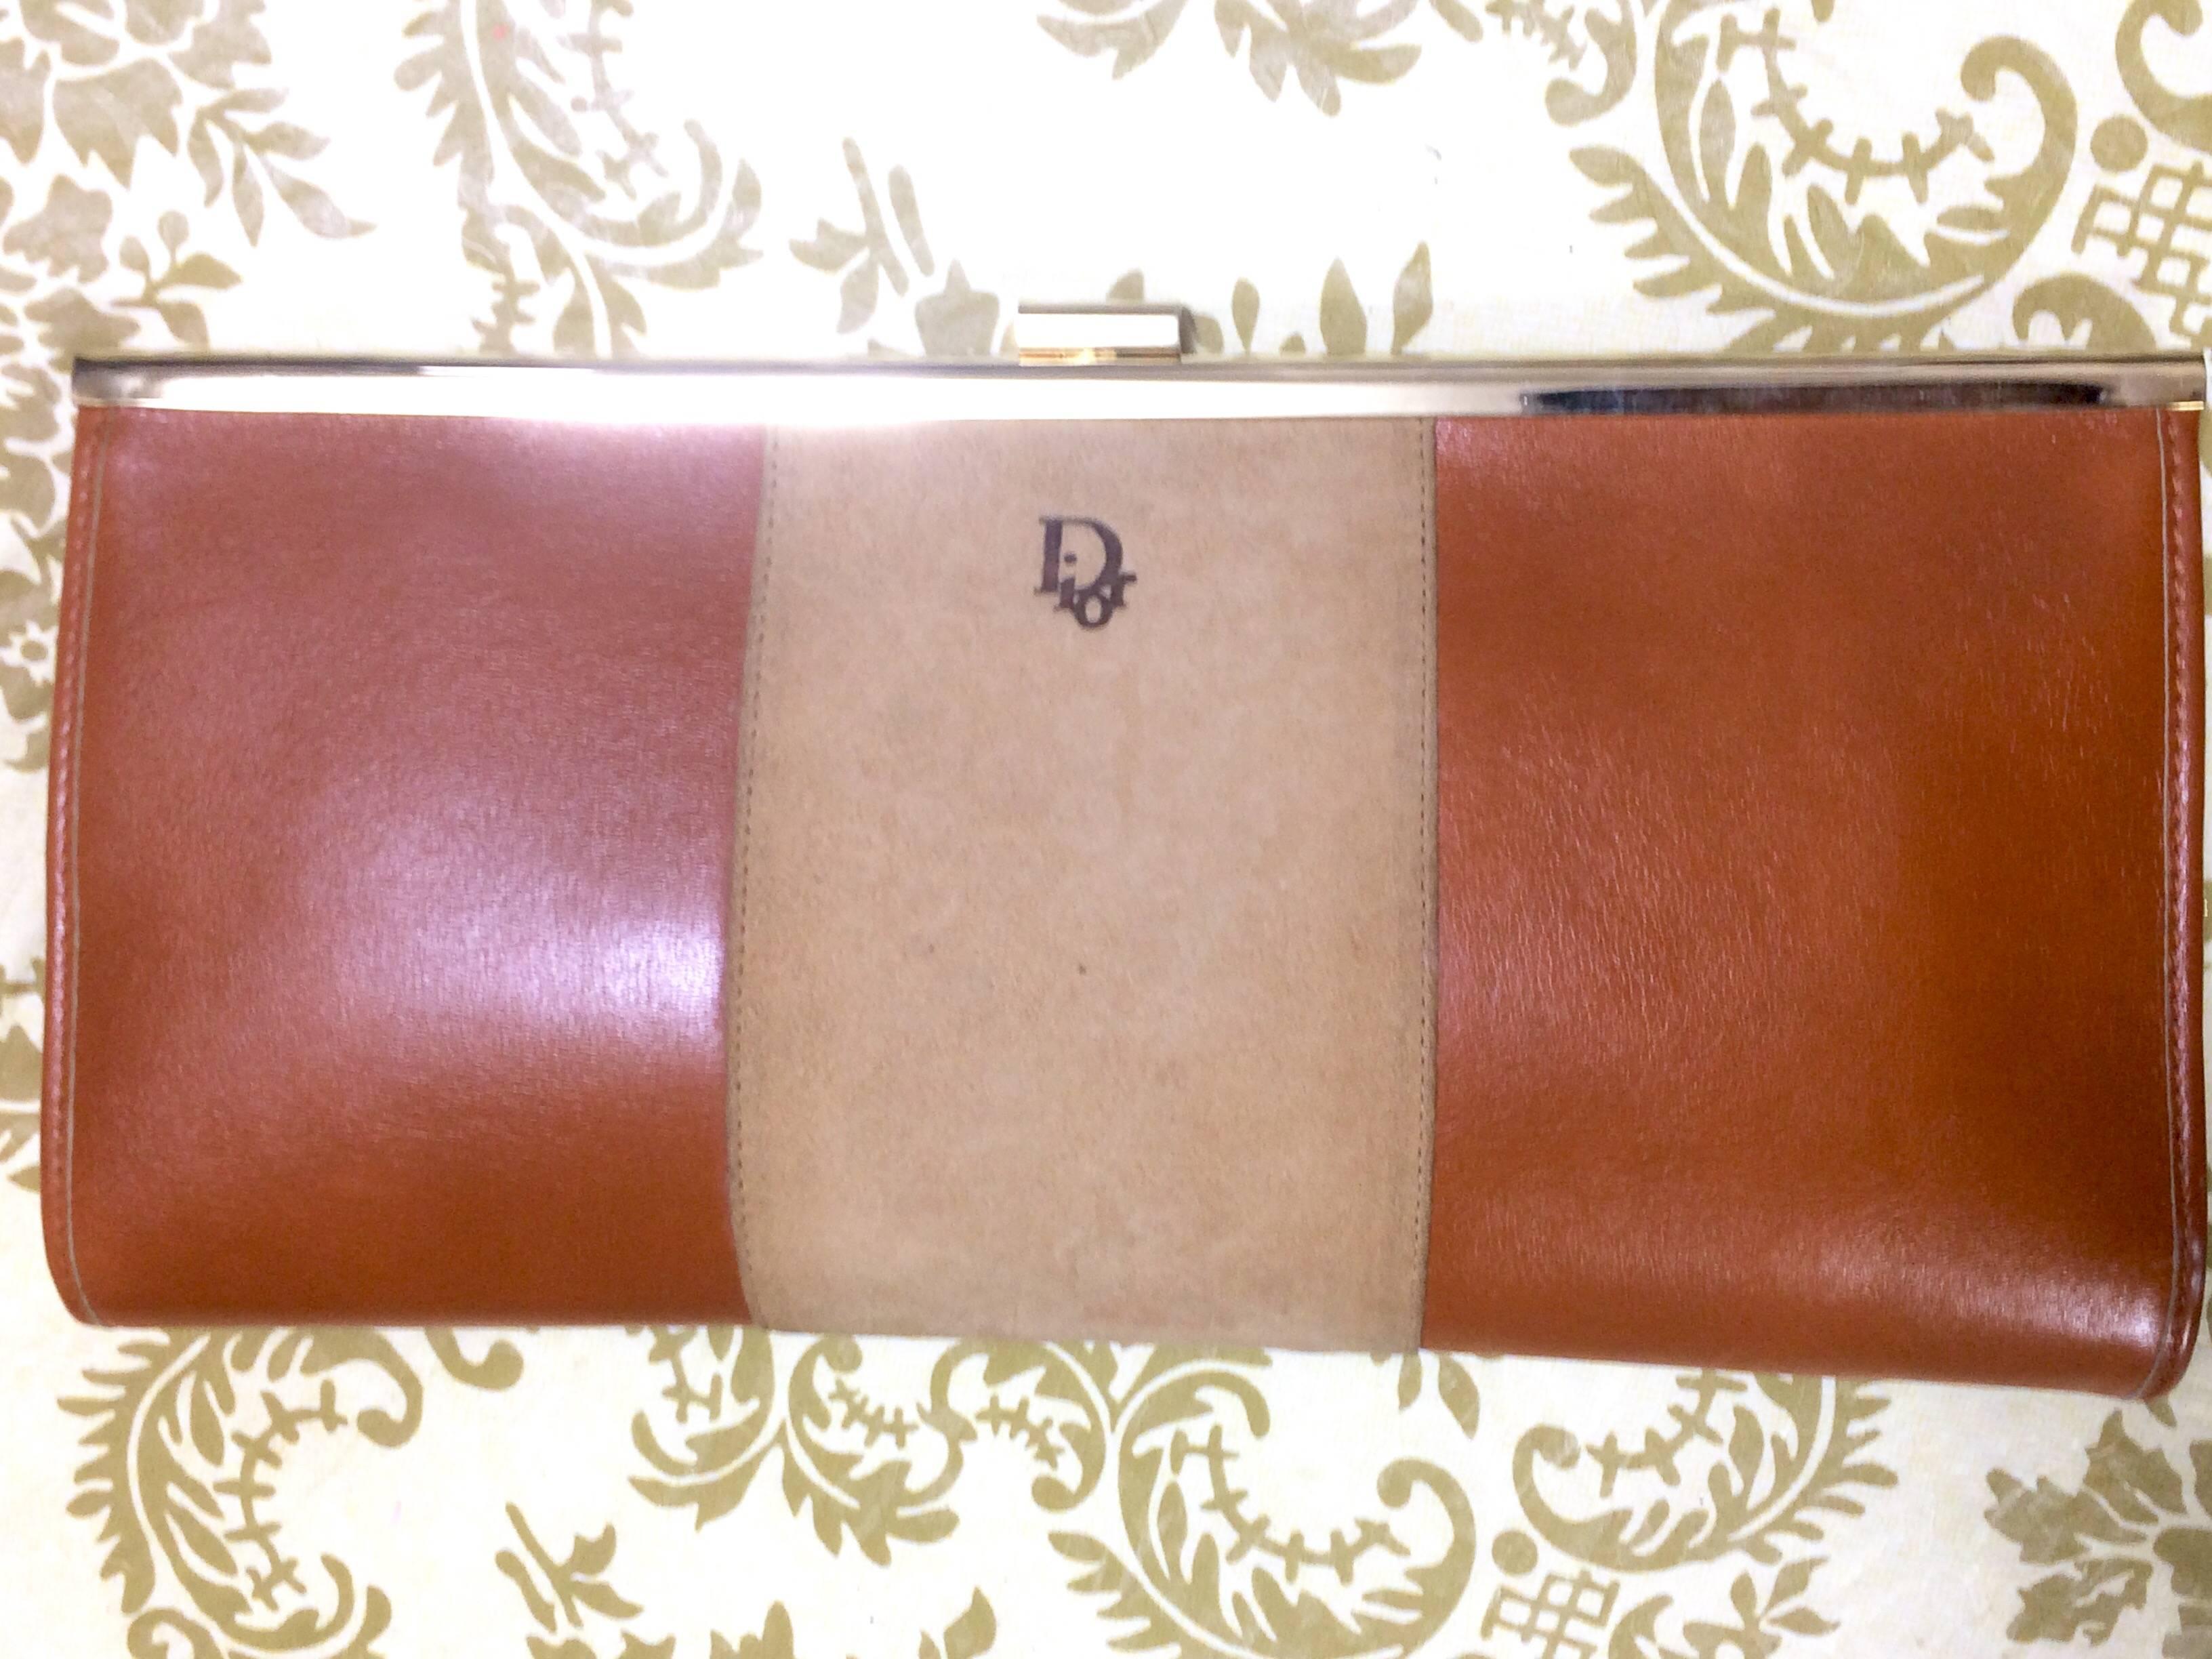 1970's Christian Dior vintage beige suede and tanned brown leather clutch purse with kiss lock closure. Can be a wallet coin wallet or cosmetic pouch. 

Looking classic and elegant! 

This is a Christian Dior vintage leather clutch purse with golden